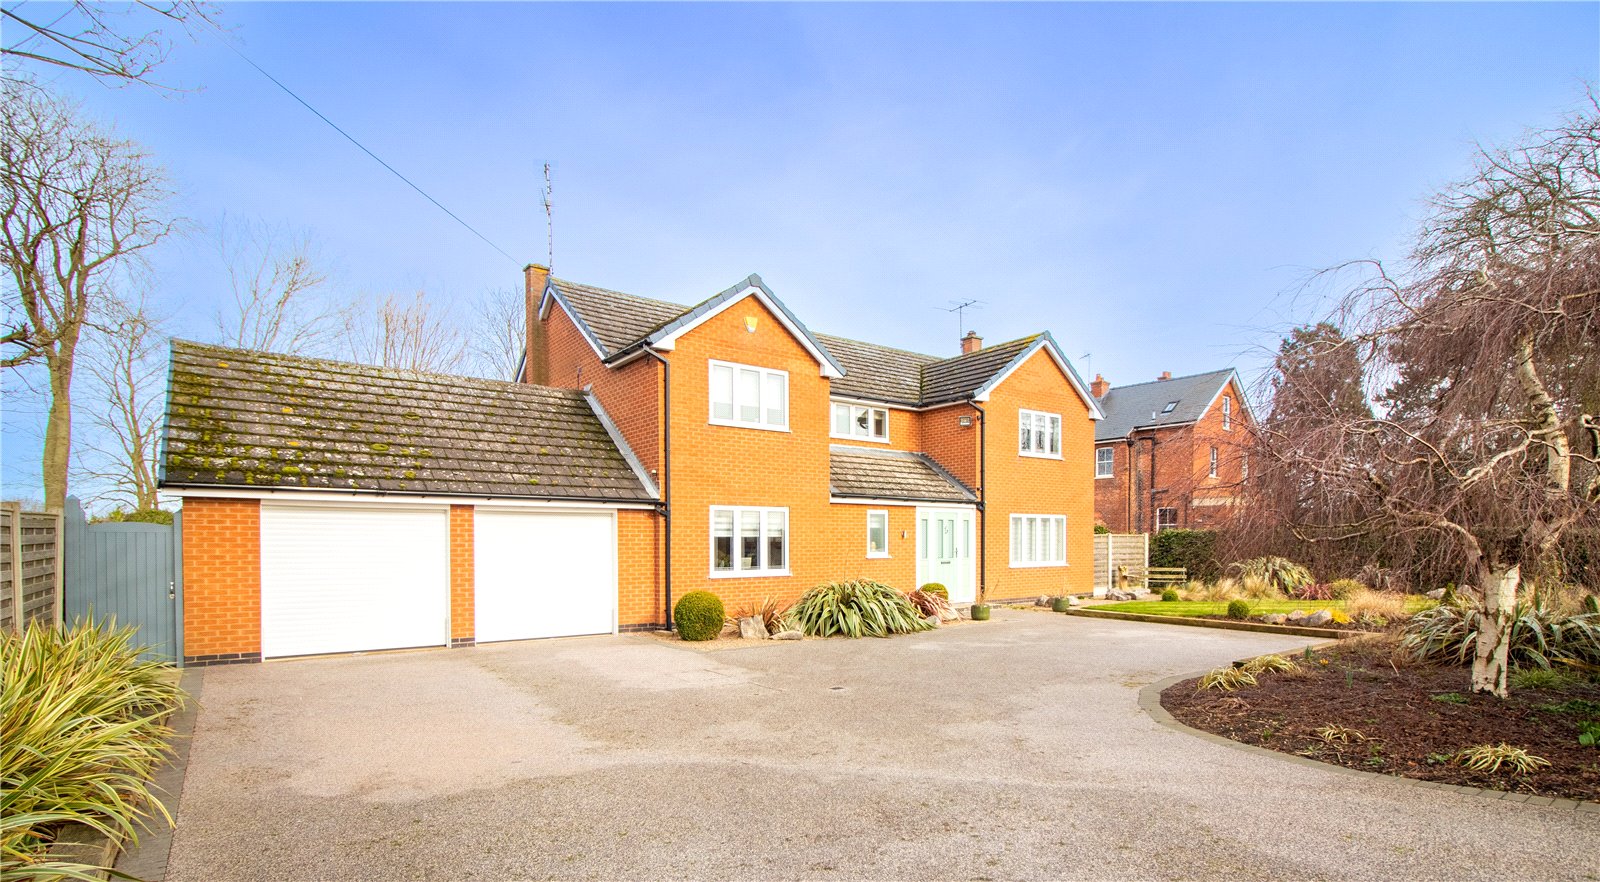 4 bed house for sale in Gonalston Lane, Hoveringham - Property Image 1